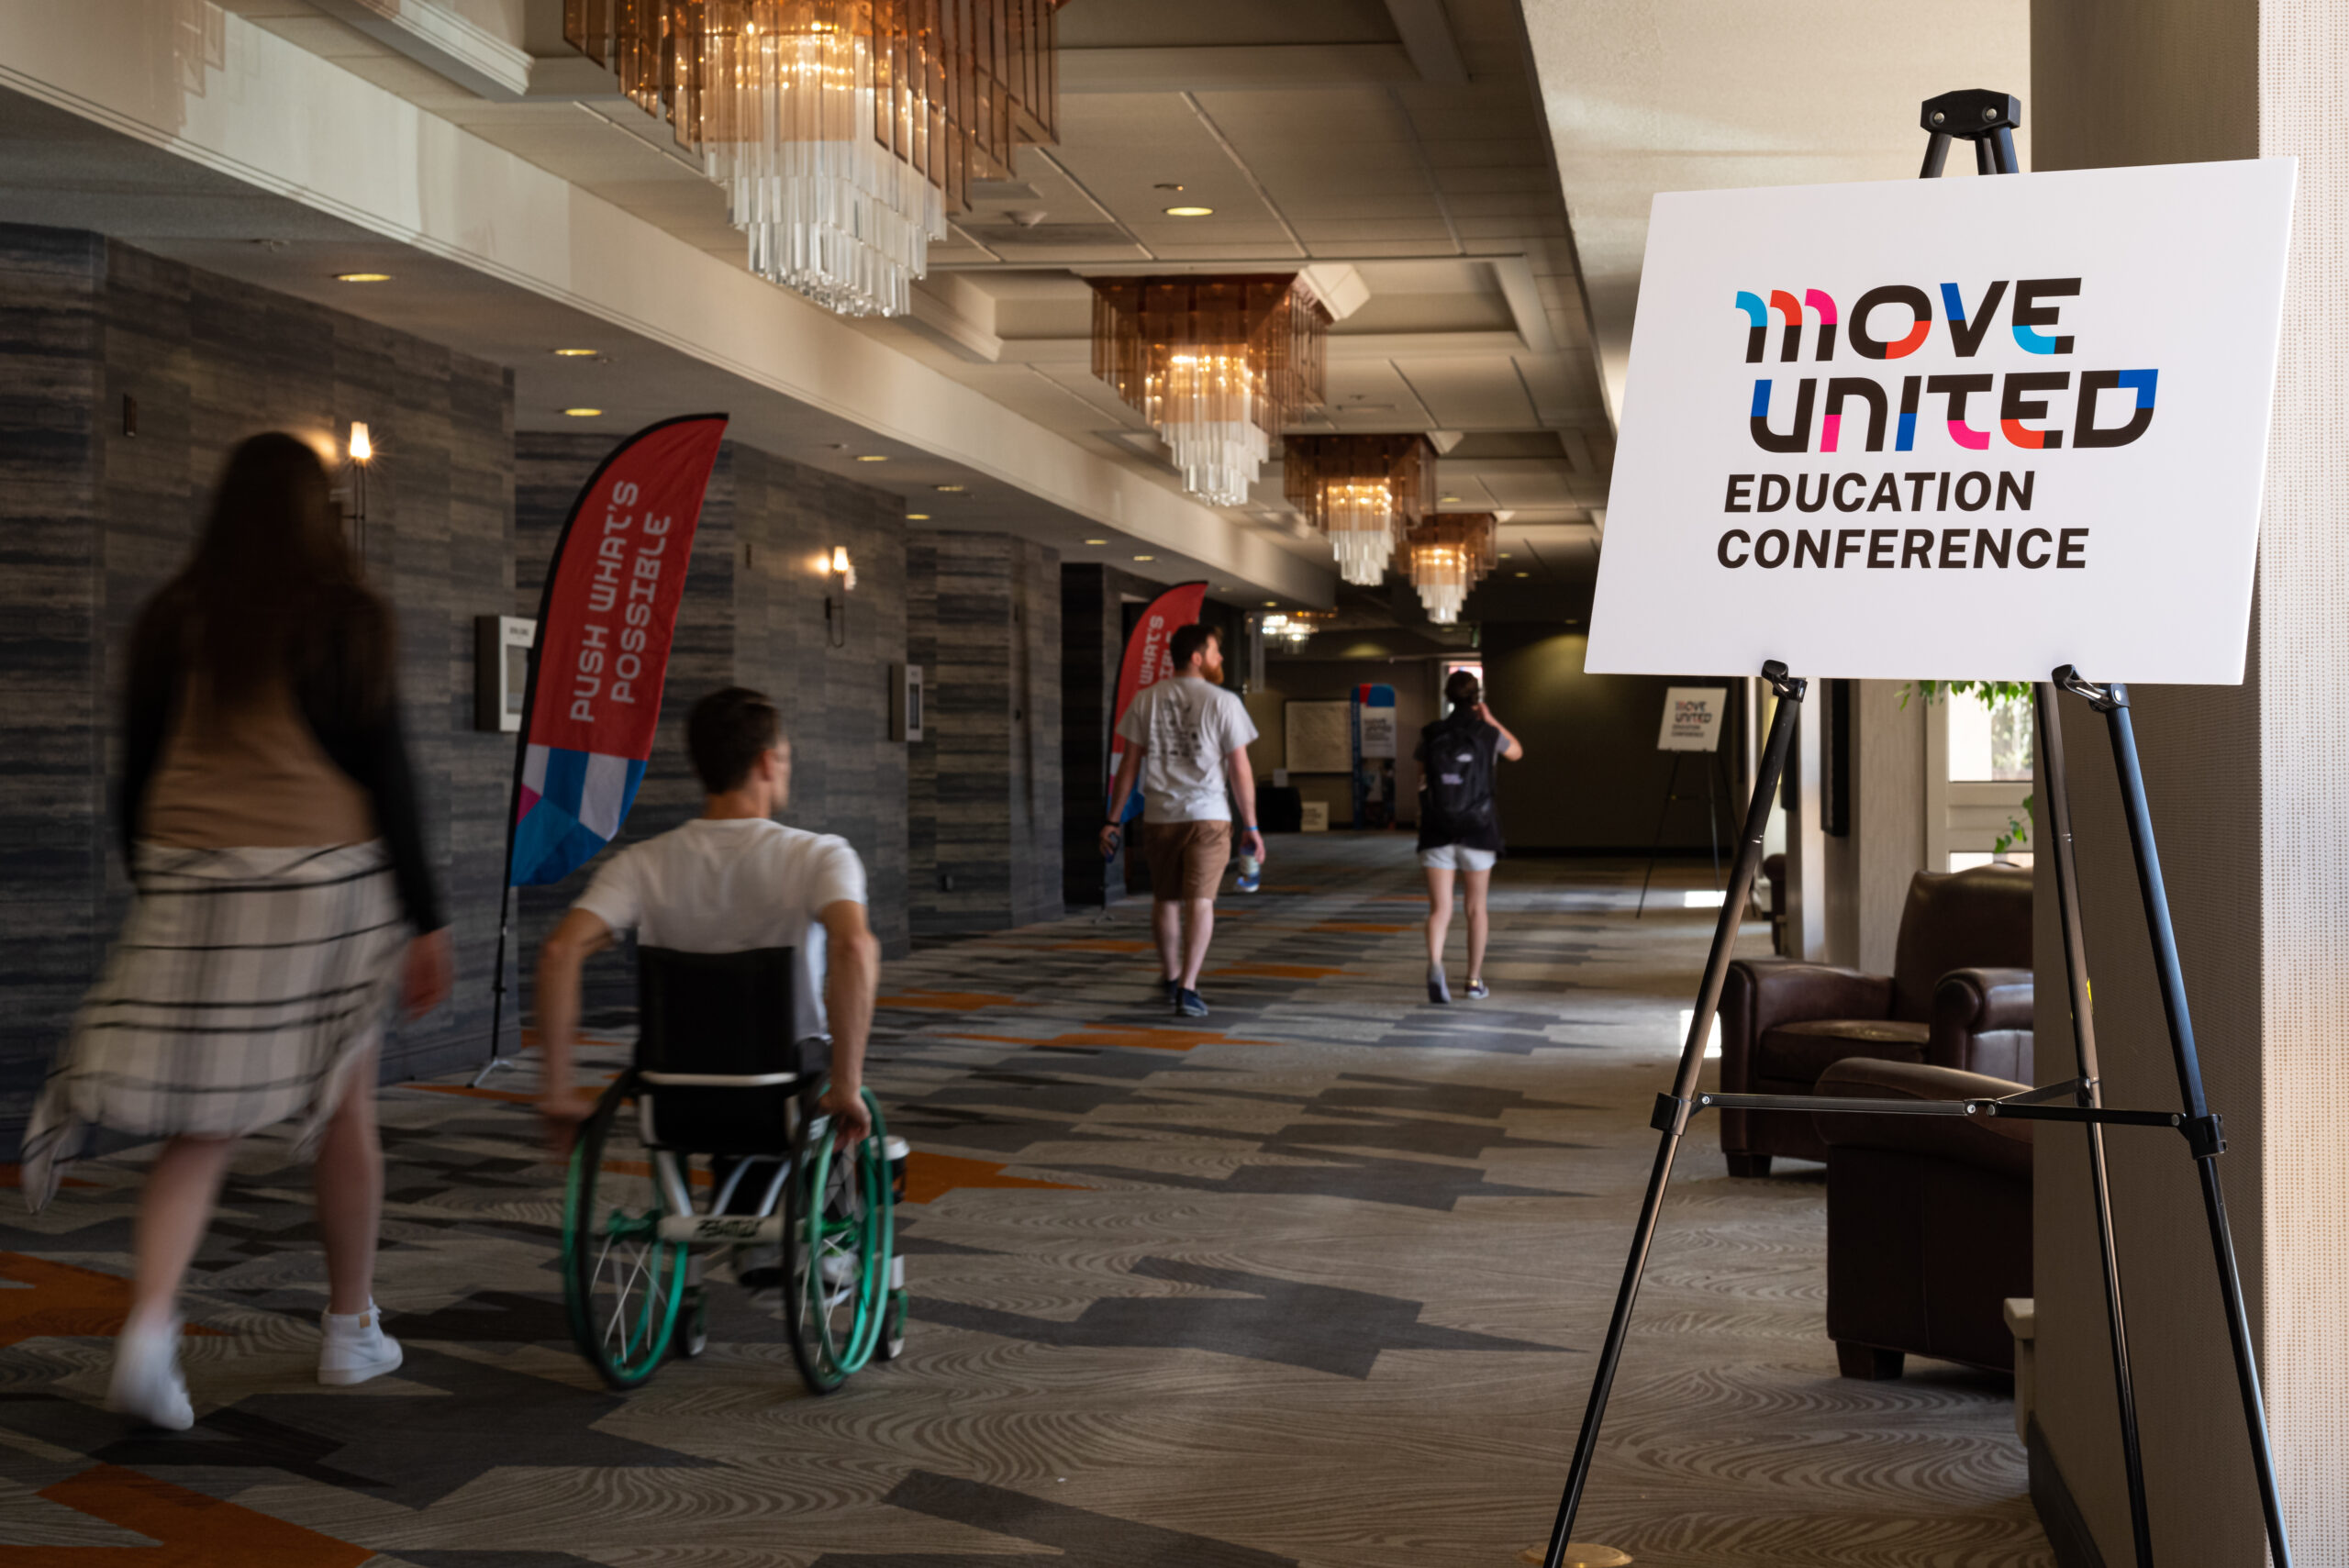 Education conference attendees rolling and walking down conference hallway, Move United Education Conference sign displayed on right of attendees